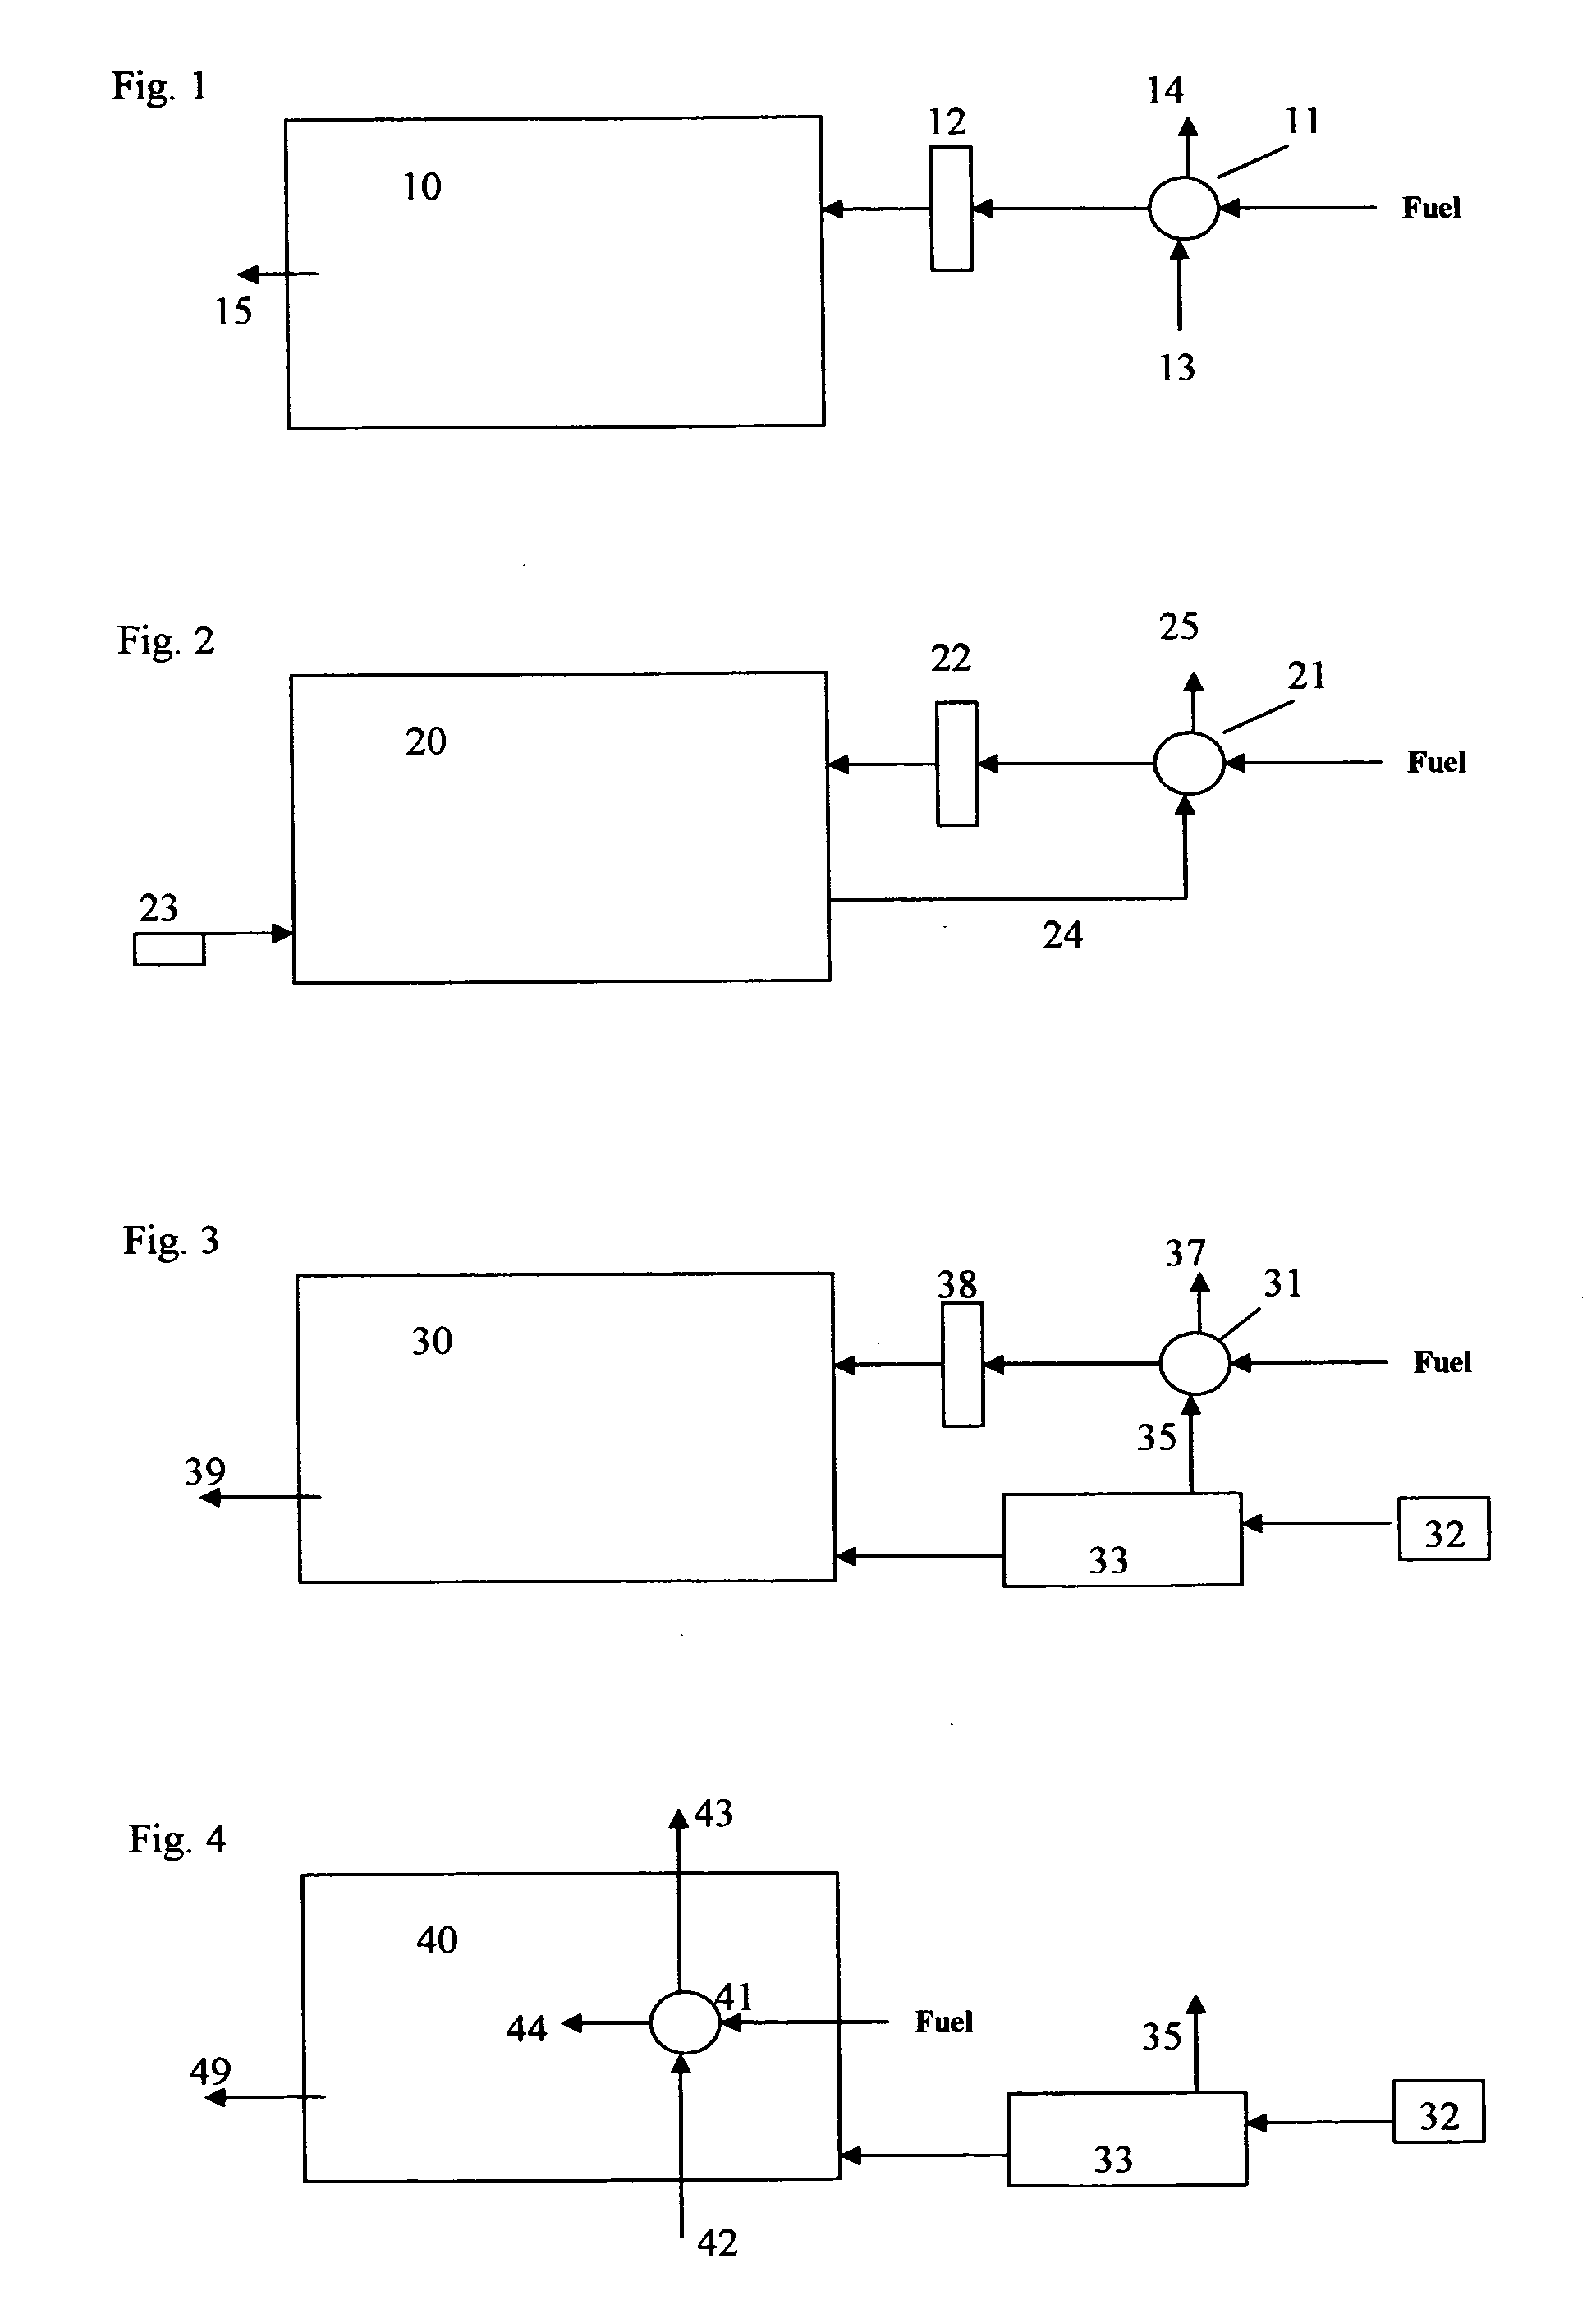 Method of producing hypoxic environments in enclosed compartments employing fuel cell technology